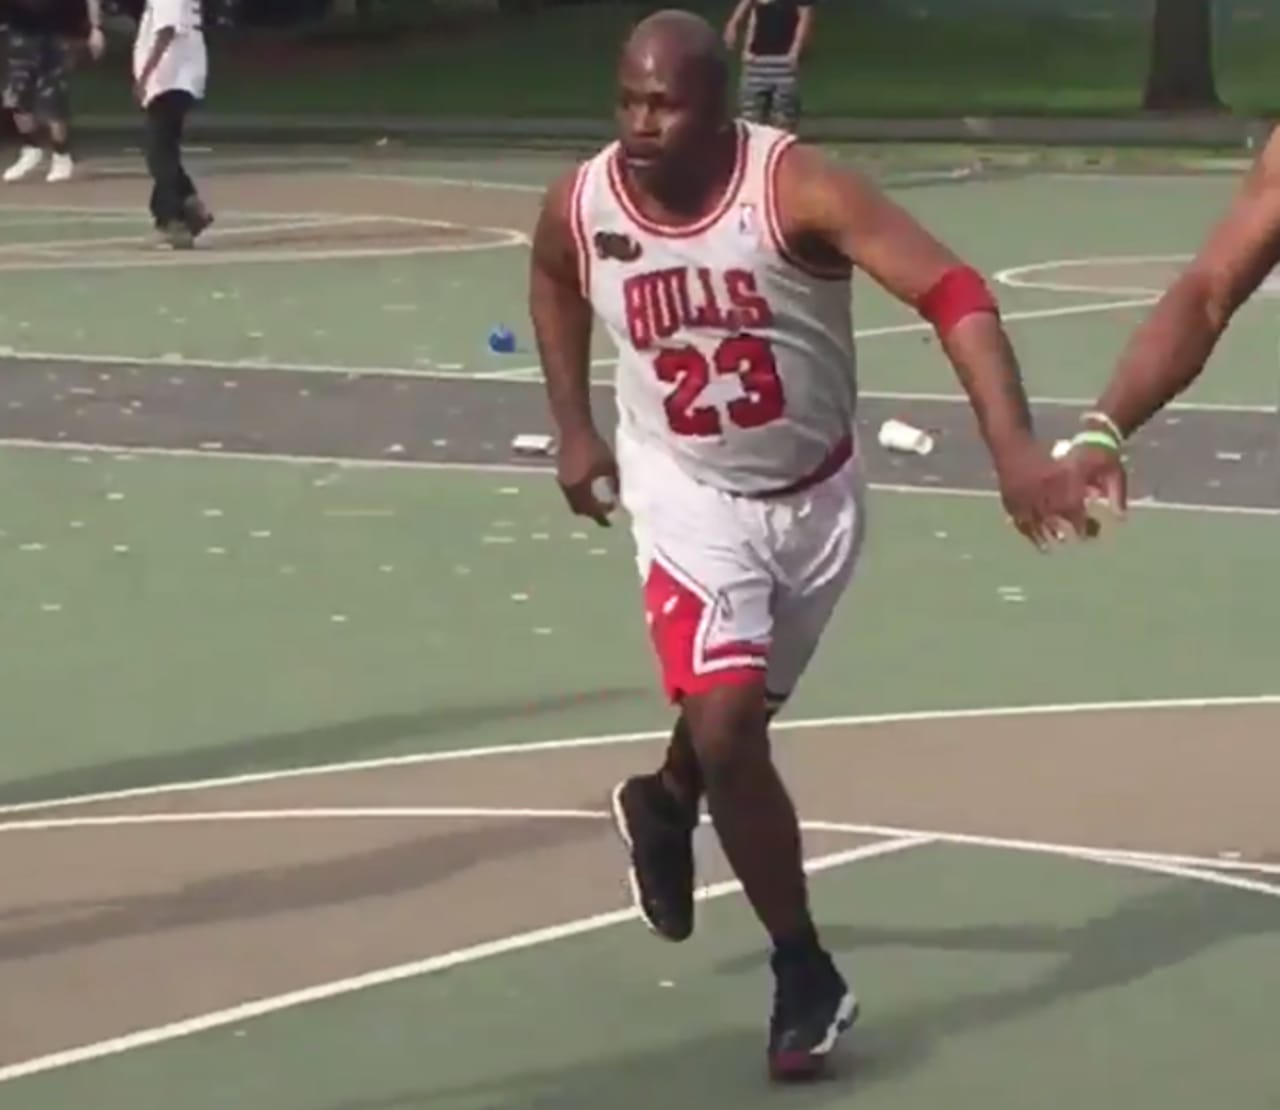 Man Playing Basketball Michael Jordan Outfit | Sole Collector